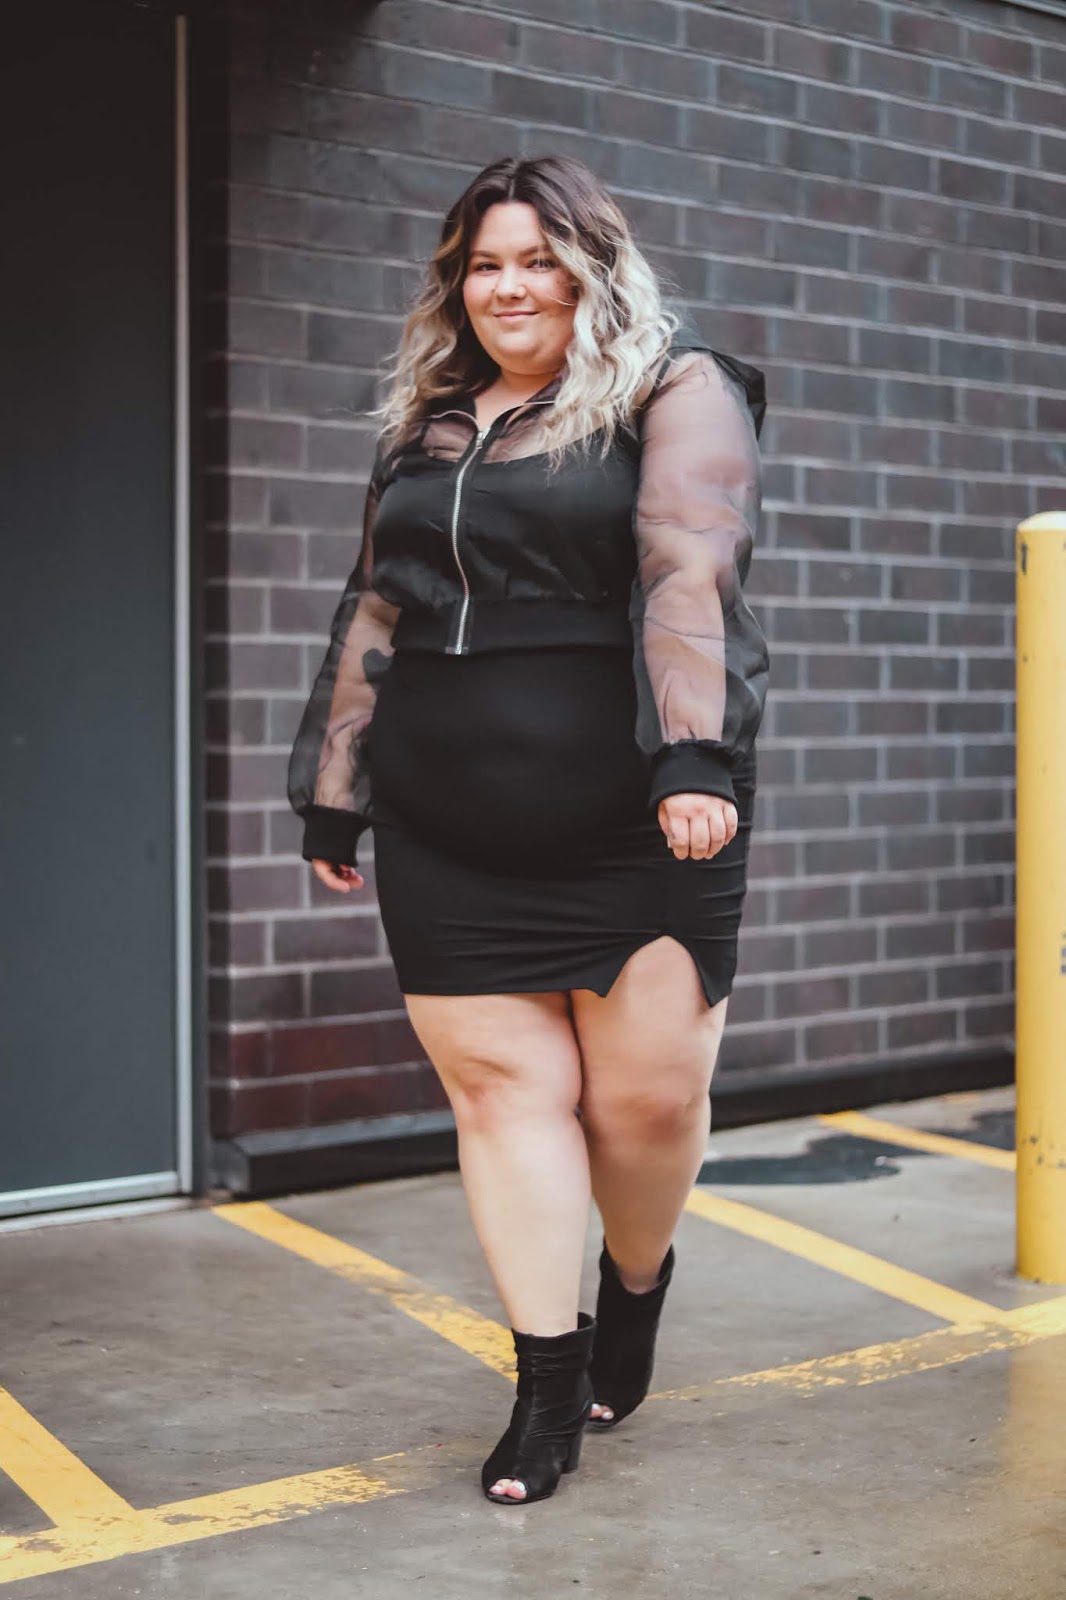 Chicago Plus Size Petite Fashion Blogger Natalie in the City reviews Forever 21's plus size clothing.